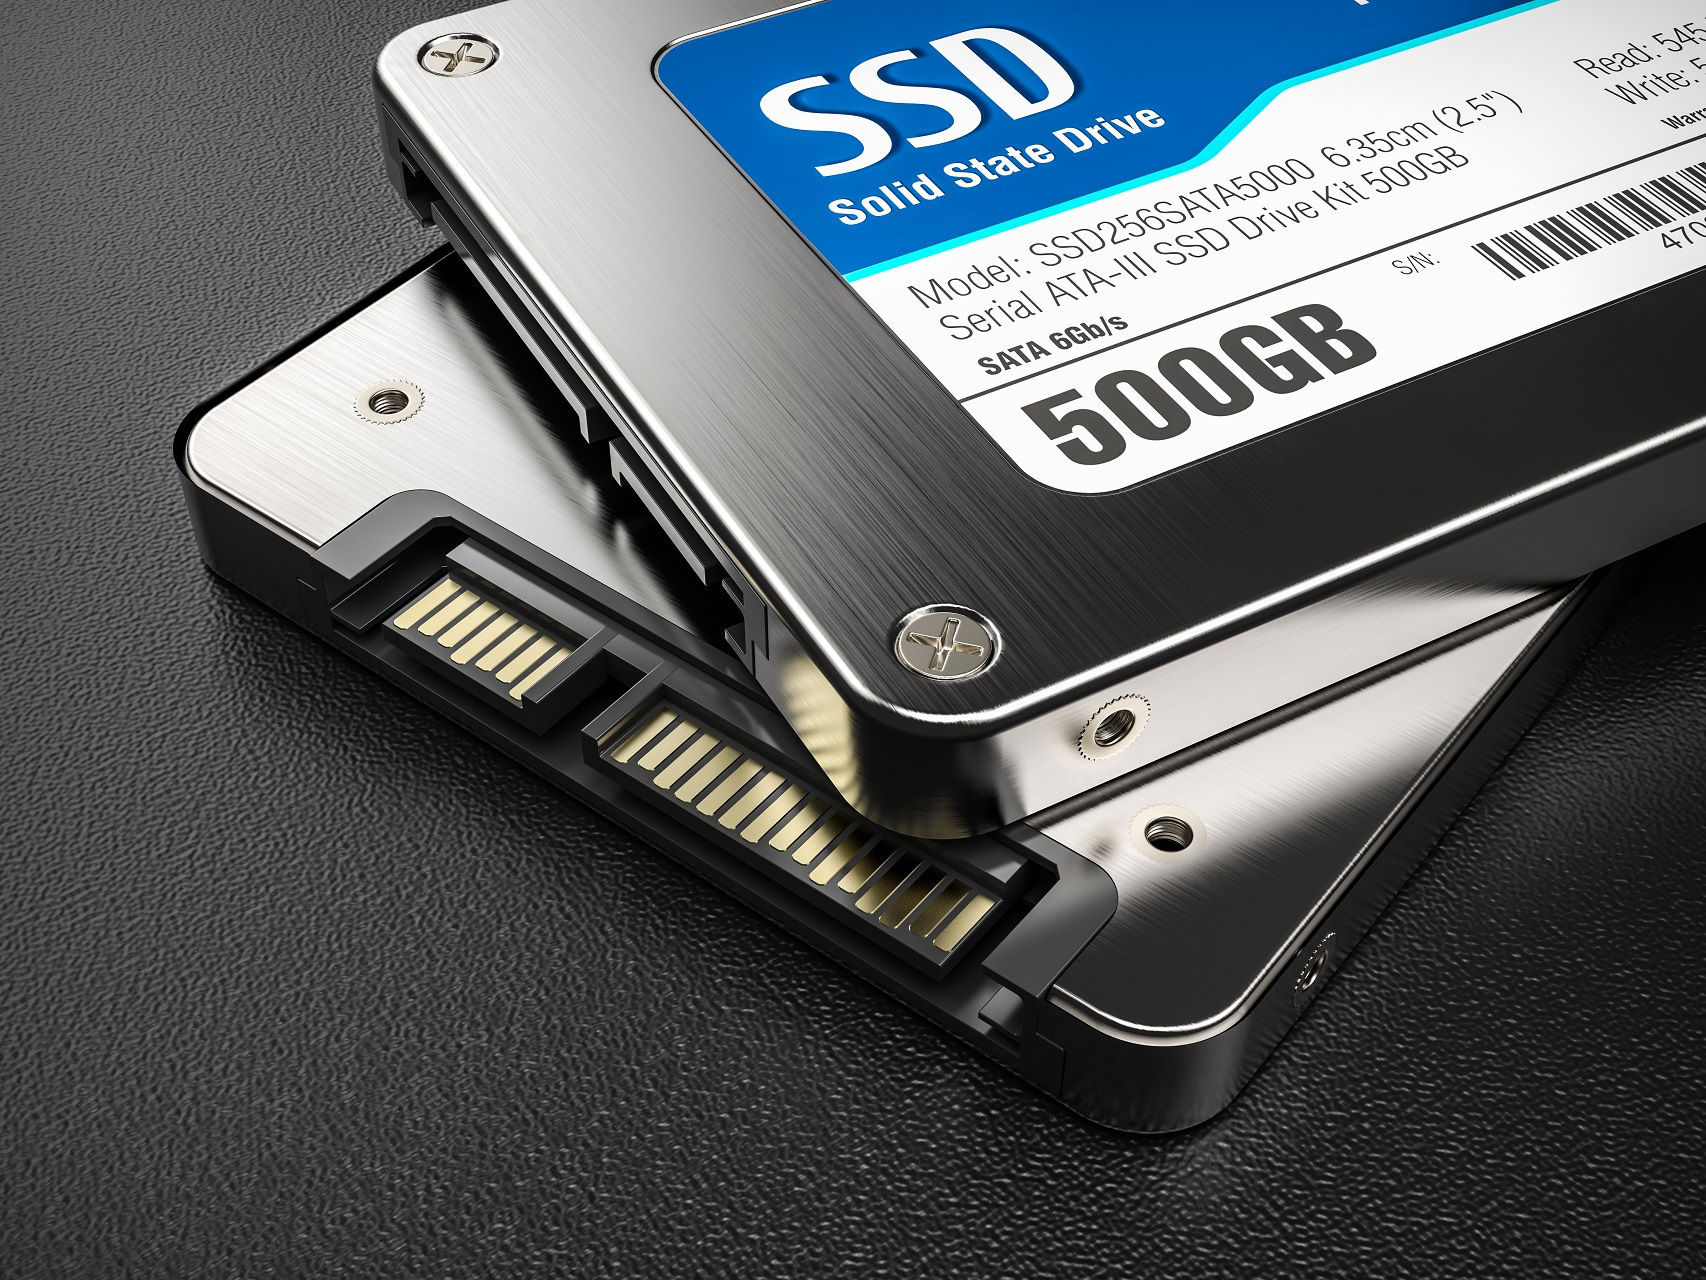 Hesitate near trial What to do if you can't install Windows 10/11 on SSD [FIX]